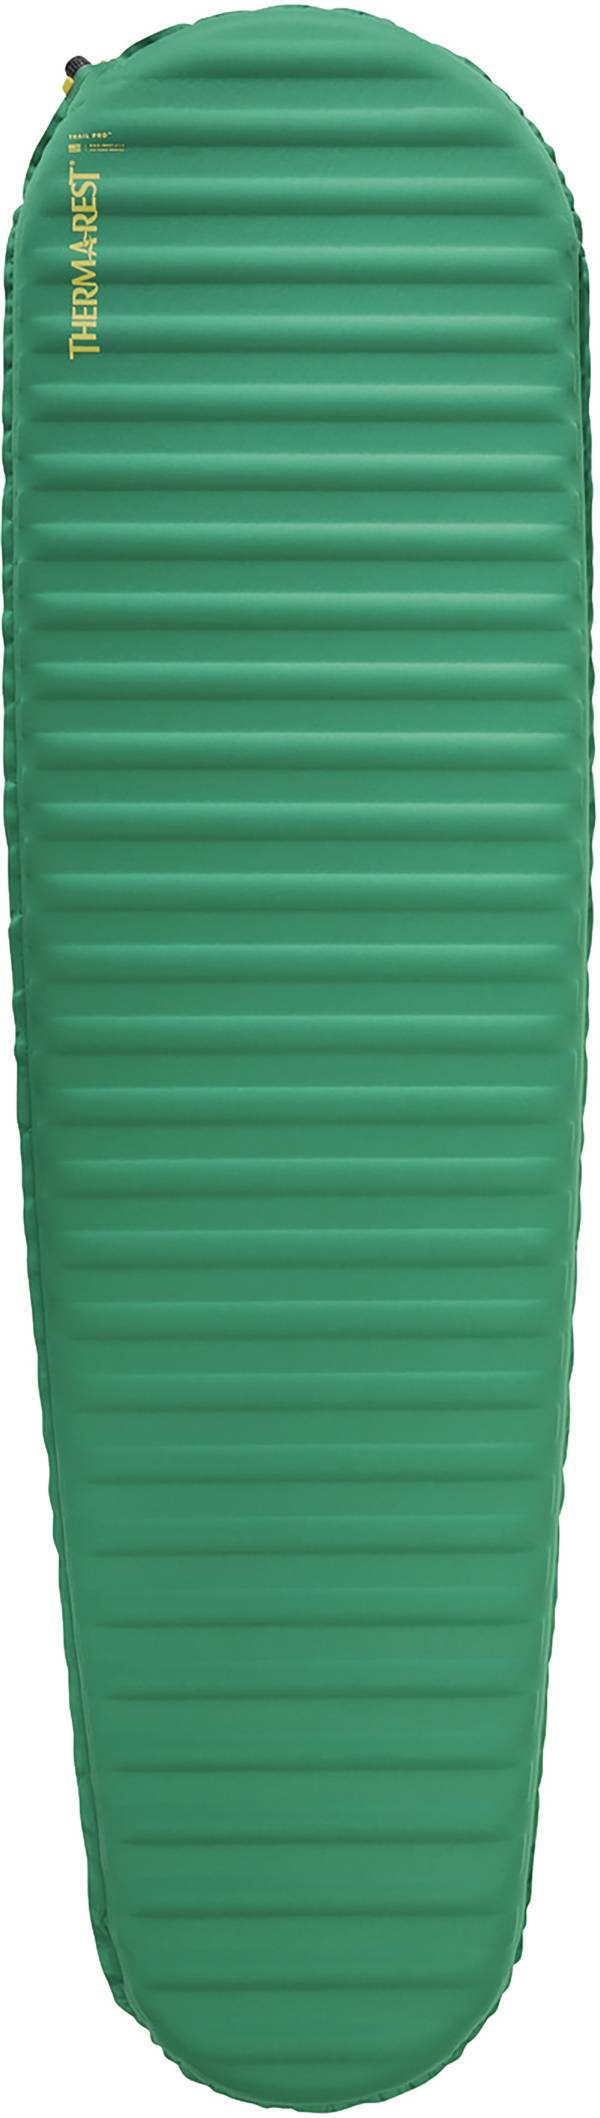 Therm-A-Rest Trail Pro Sleeping Pad product image